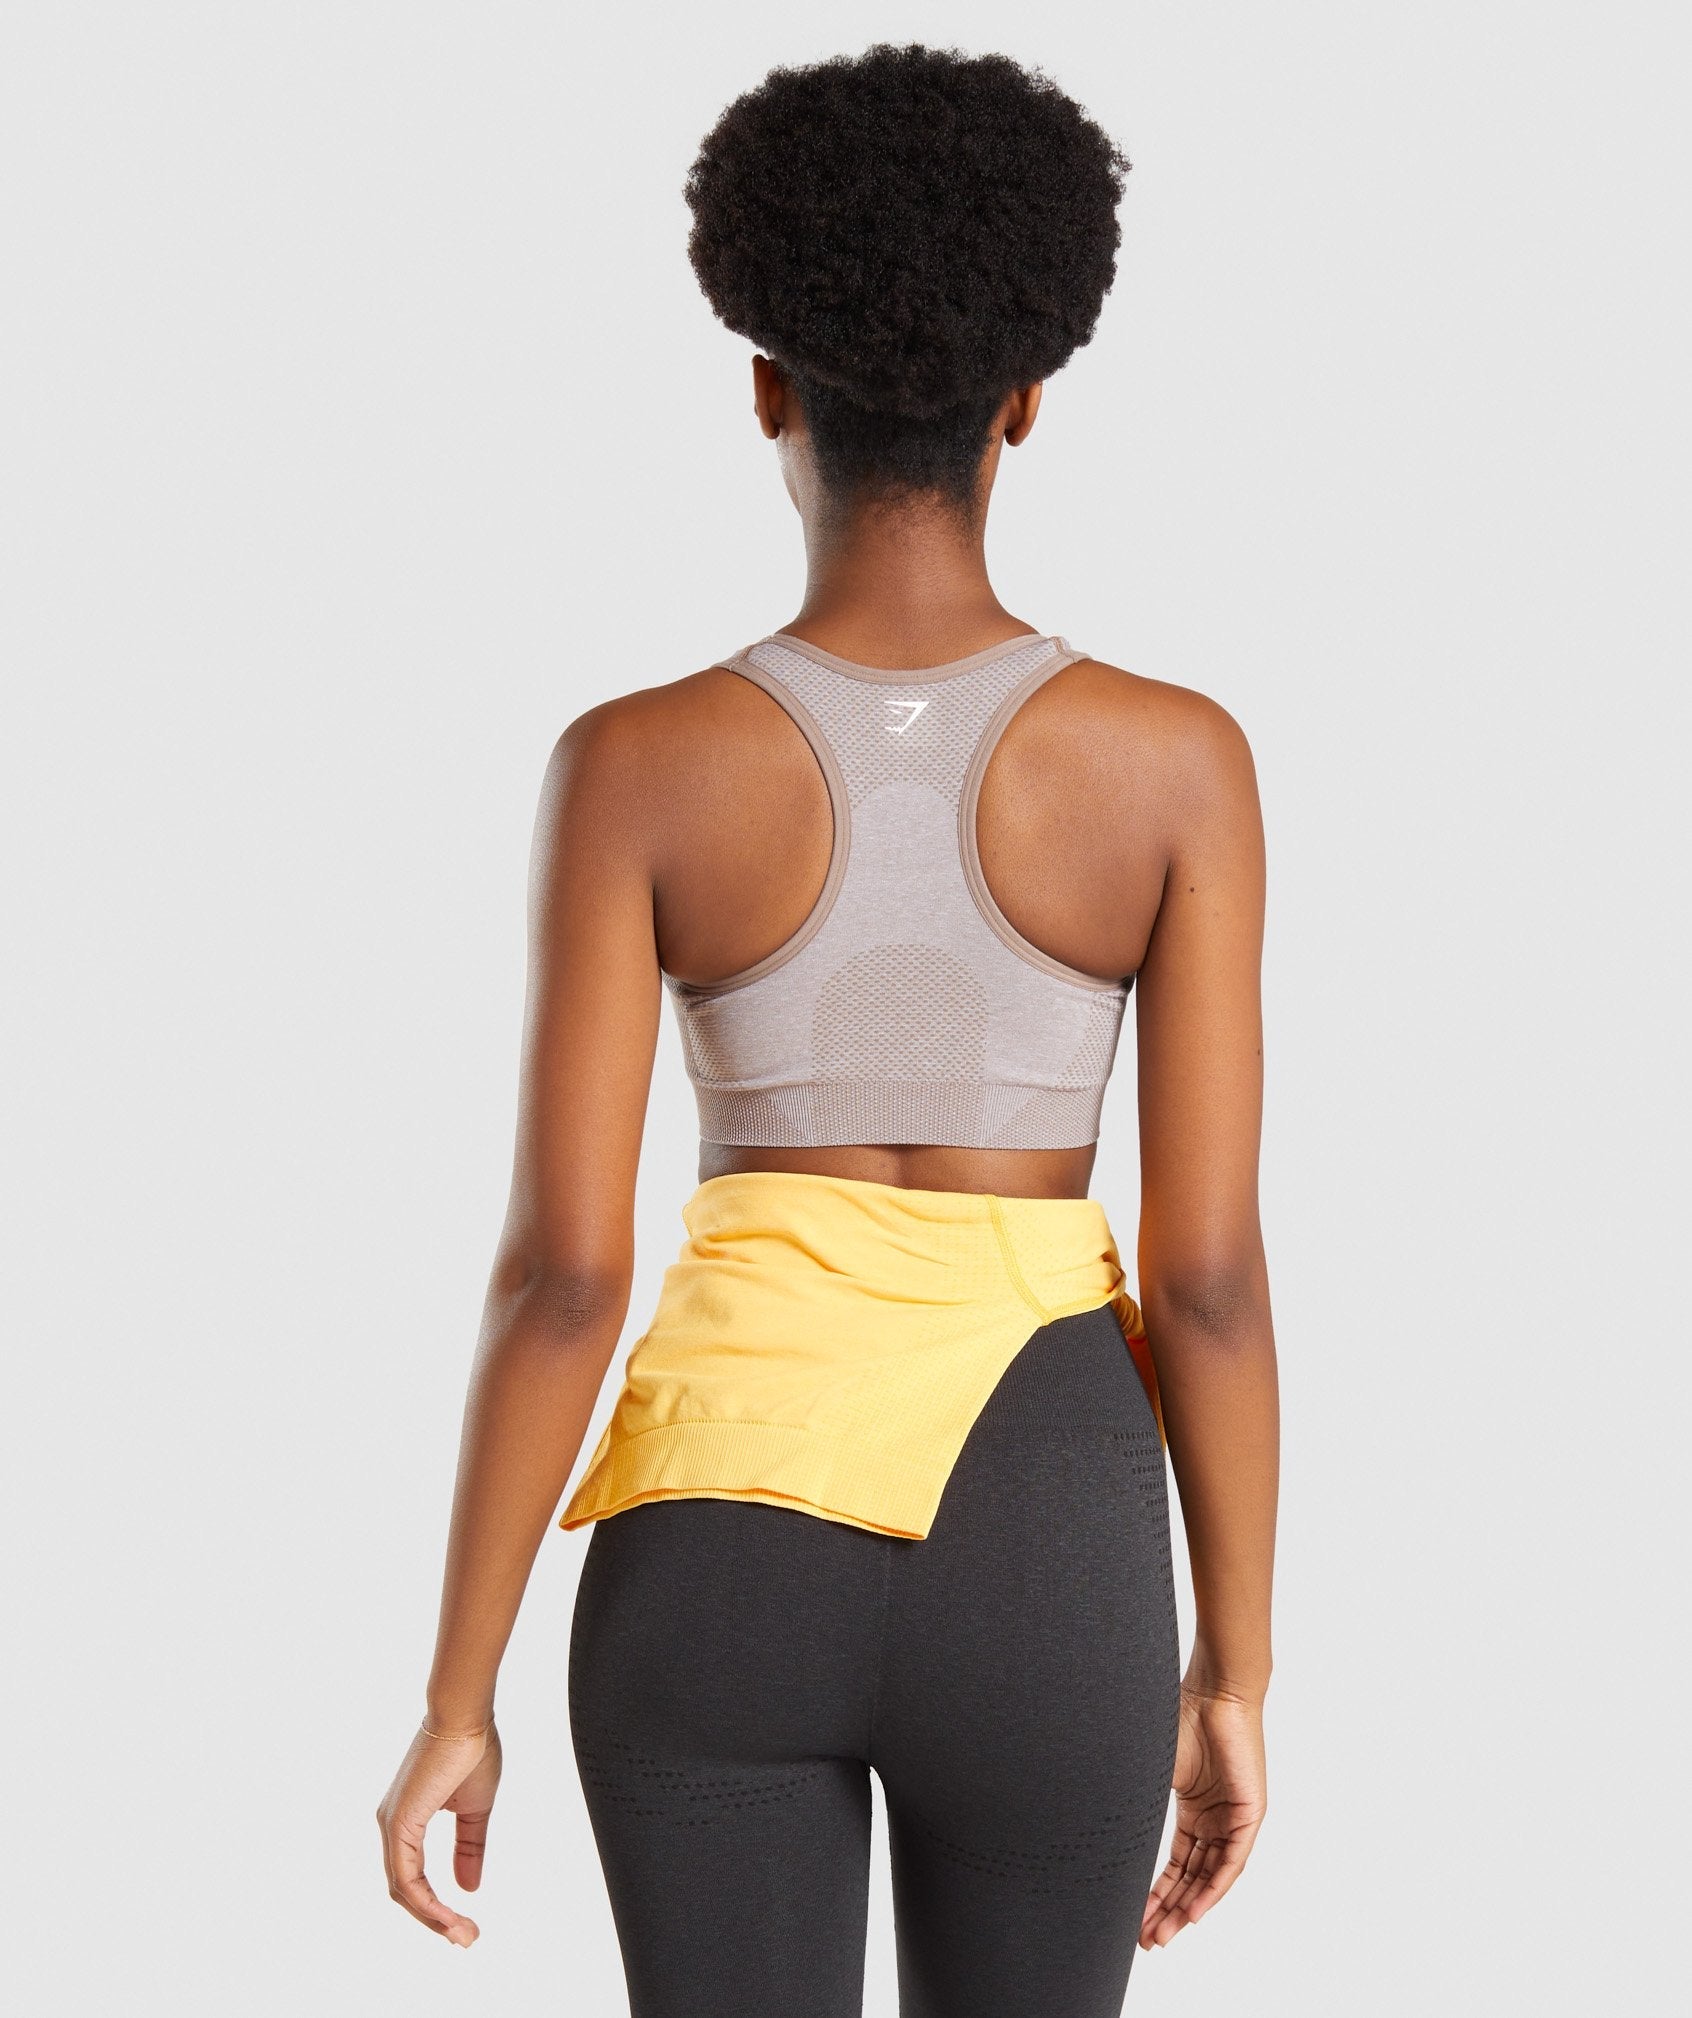 Vital Seamless 2.0 Sports Bra in Taupe Marl - view 2